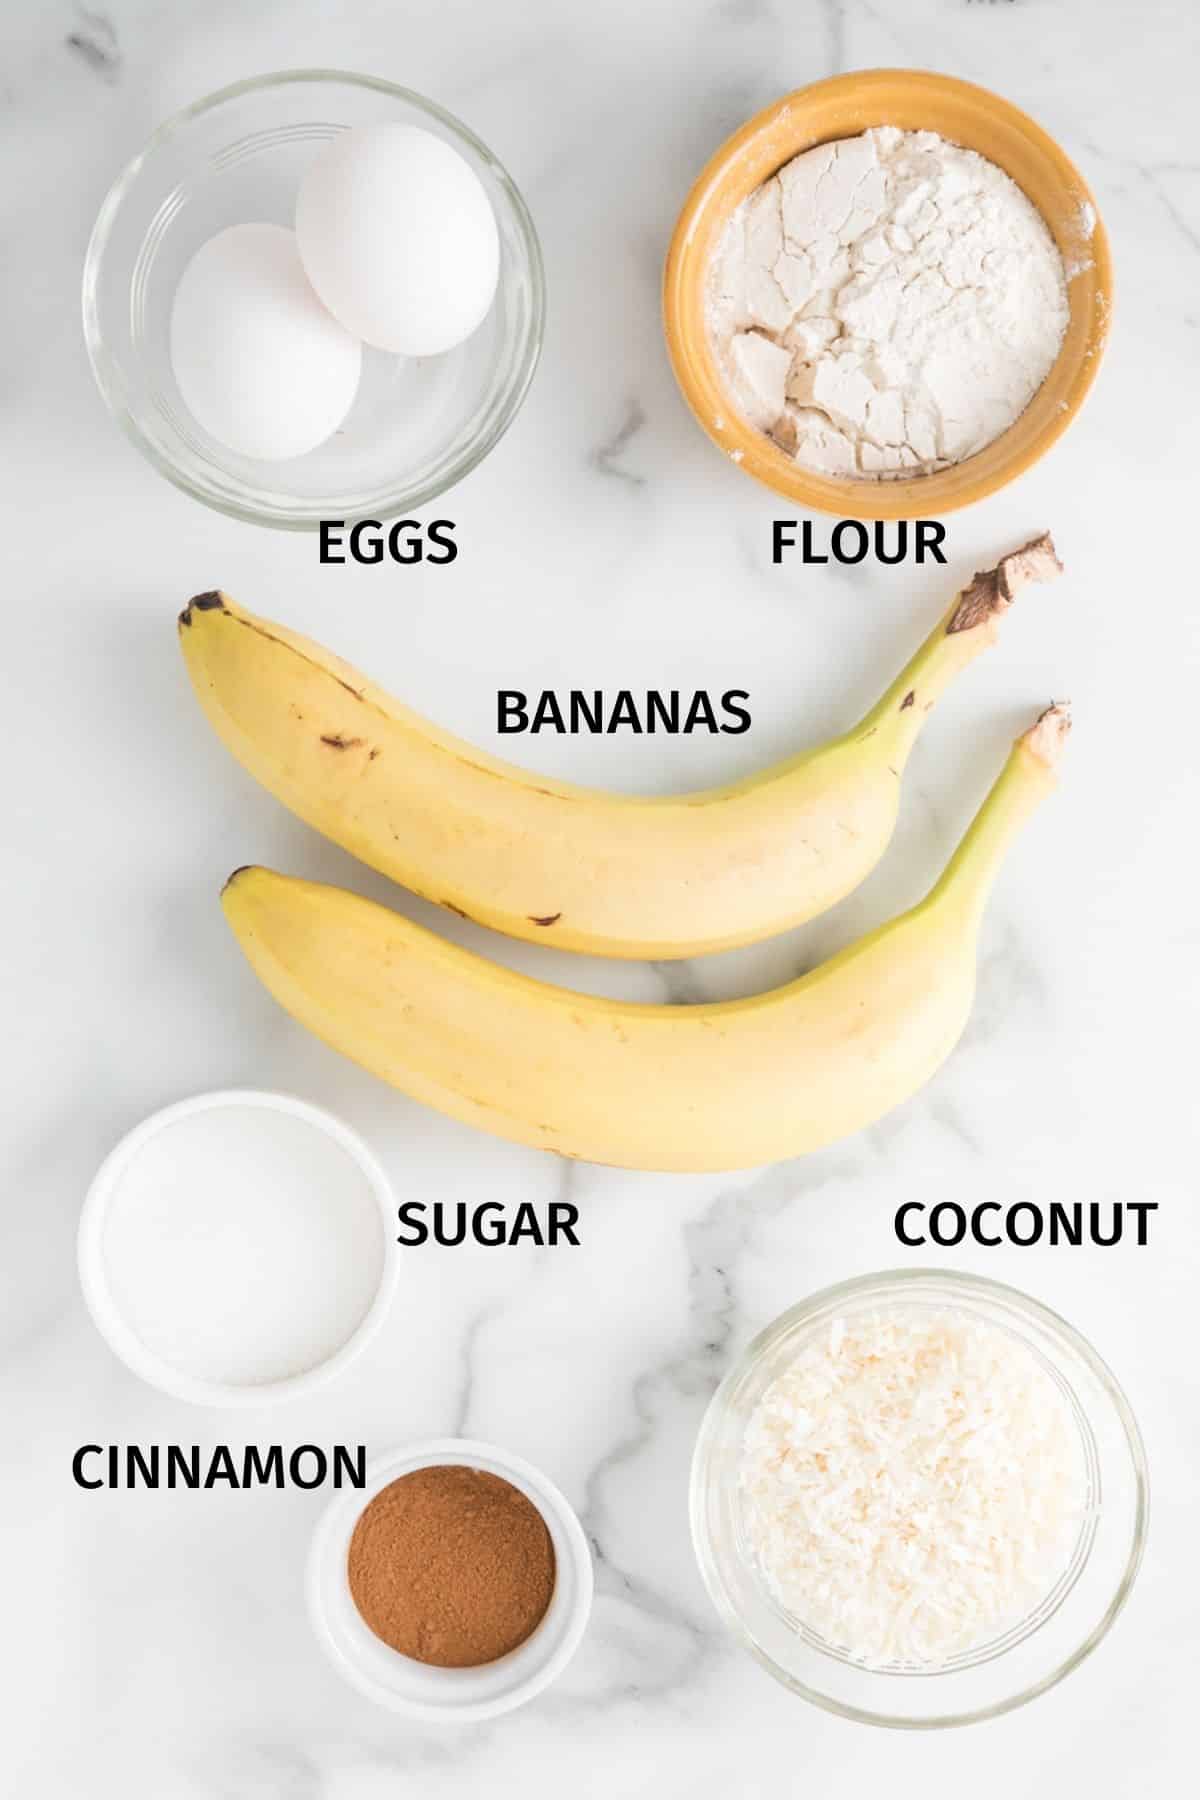 Ingredients for coconut banana fritters in small bowls on a white surface.